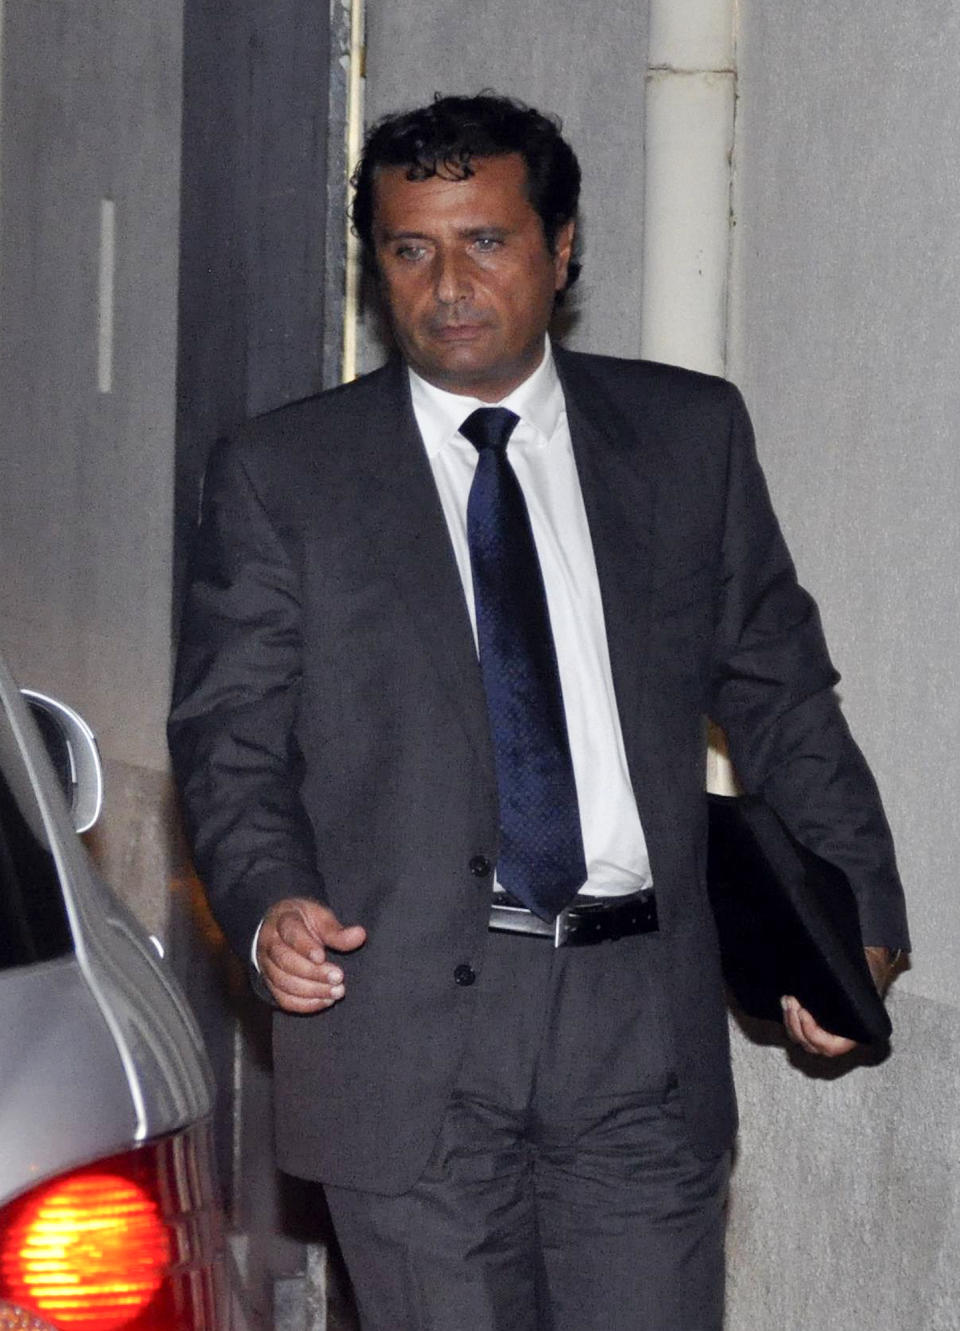 Captain Francesco Schettino leaves after an audience of his trial at the converted Teatro Moderno theater, in Grosseto, Italy, Monday, Oct. 28, 2013. The captain of the wrecked Costa Concordia is charged with manslaughter, causing the shipwreck and abandoning ship before the luxury cruise liner's 4,200 passengers and crew could be evacuated on Jan. 13, 2012 when the ship collided with a reef off the Tuscan island of Giglio, killing 32 people. (AP Photo/Giacomo Aprili)